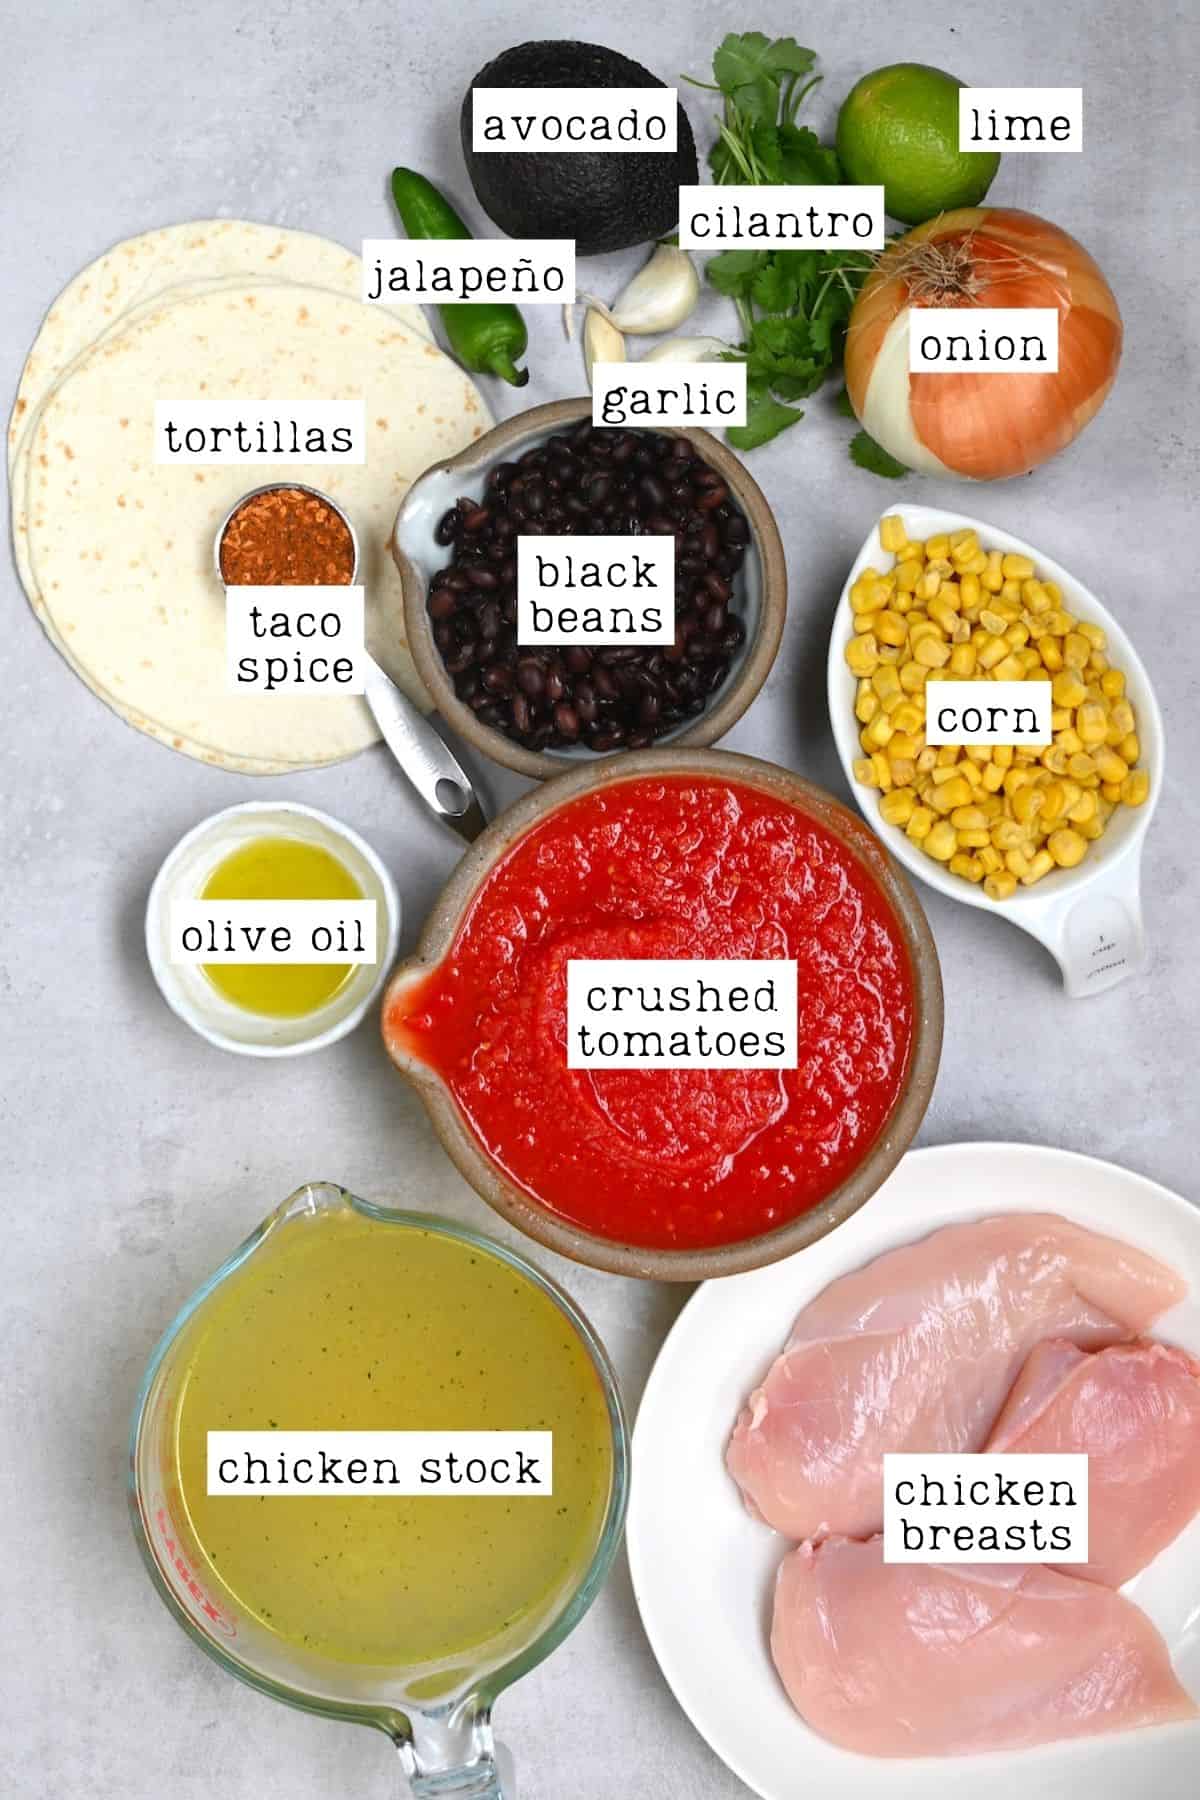 Ingredients for chicken tortilla soup